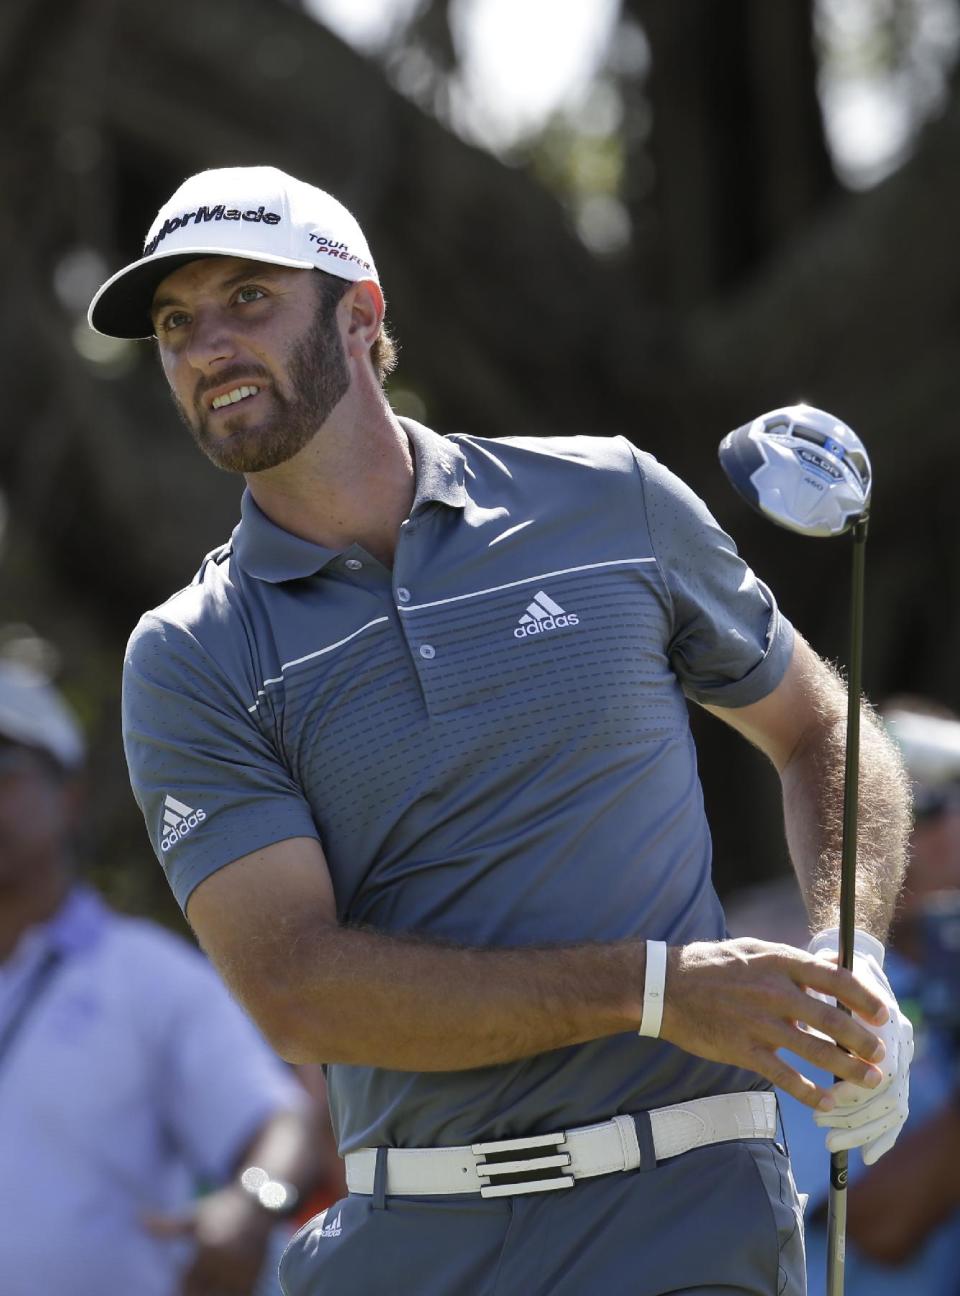 Dustin Johnson watched his shot from the fifth tee during the second round of the Cadillac Championship golf tournament Friday, March 7, 2014, in Doral, Fla. (AP Photo/Lynne Sladky)